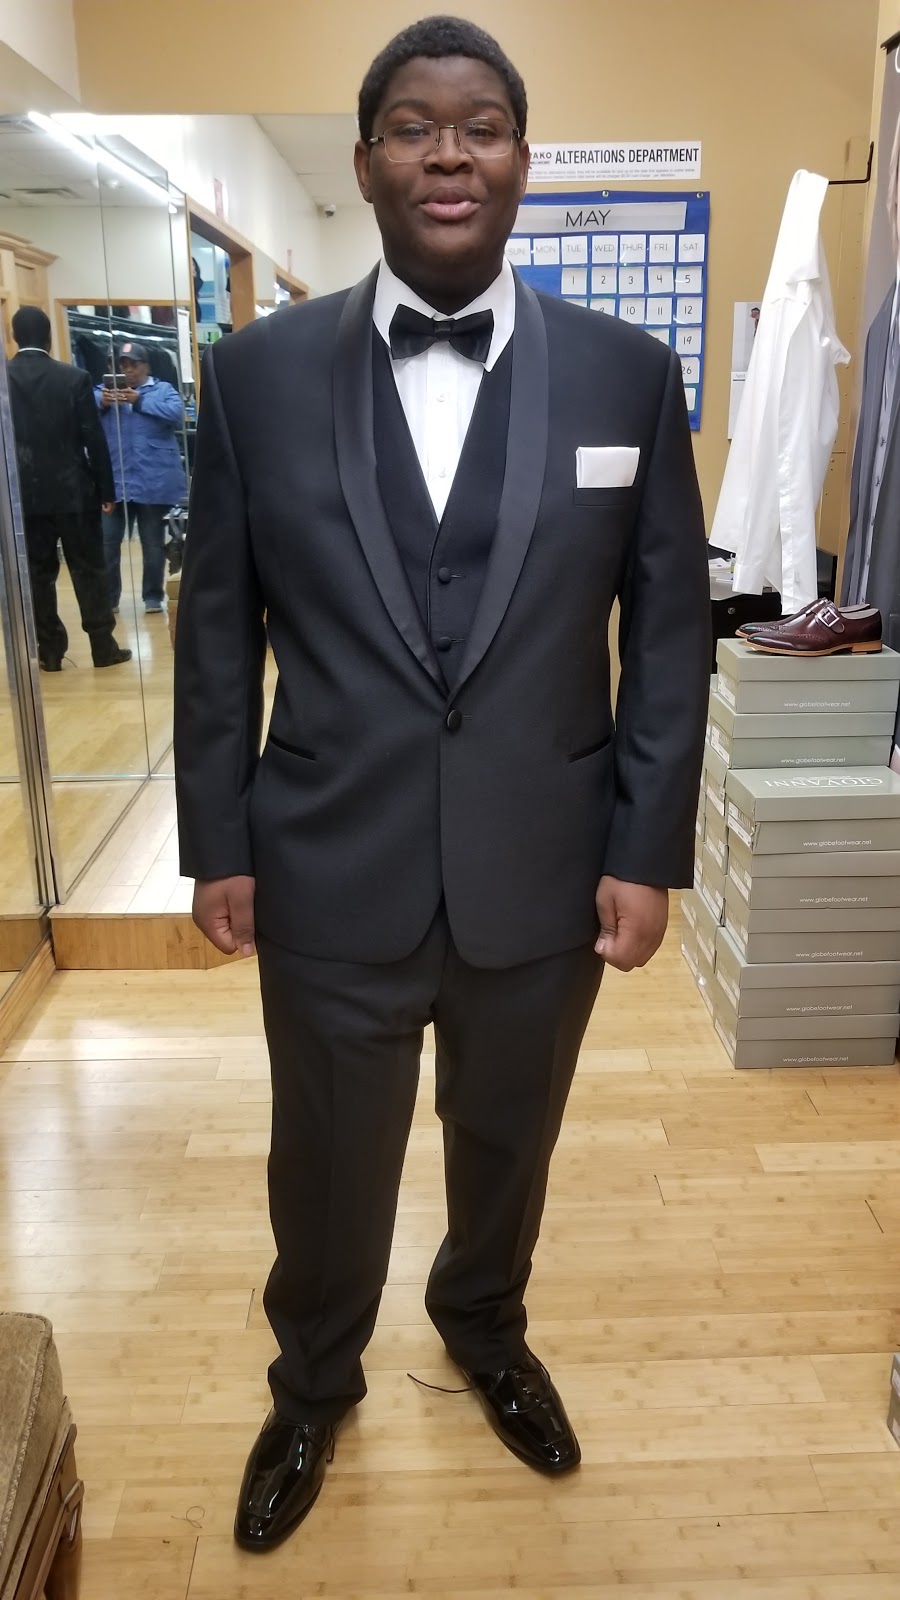 Karako Suits of East Northport | 1931C Jericho Turnpike In the Northport, Plaza next to Bagel Boss, East Northport, NY 11731 | Phone: (631) 486-6688